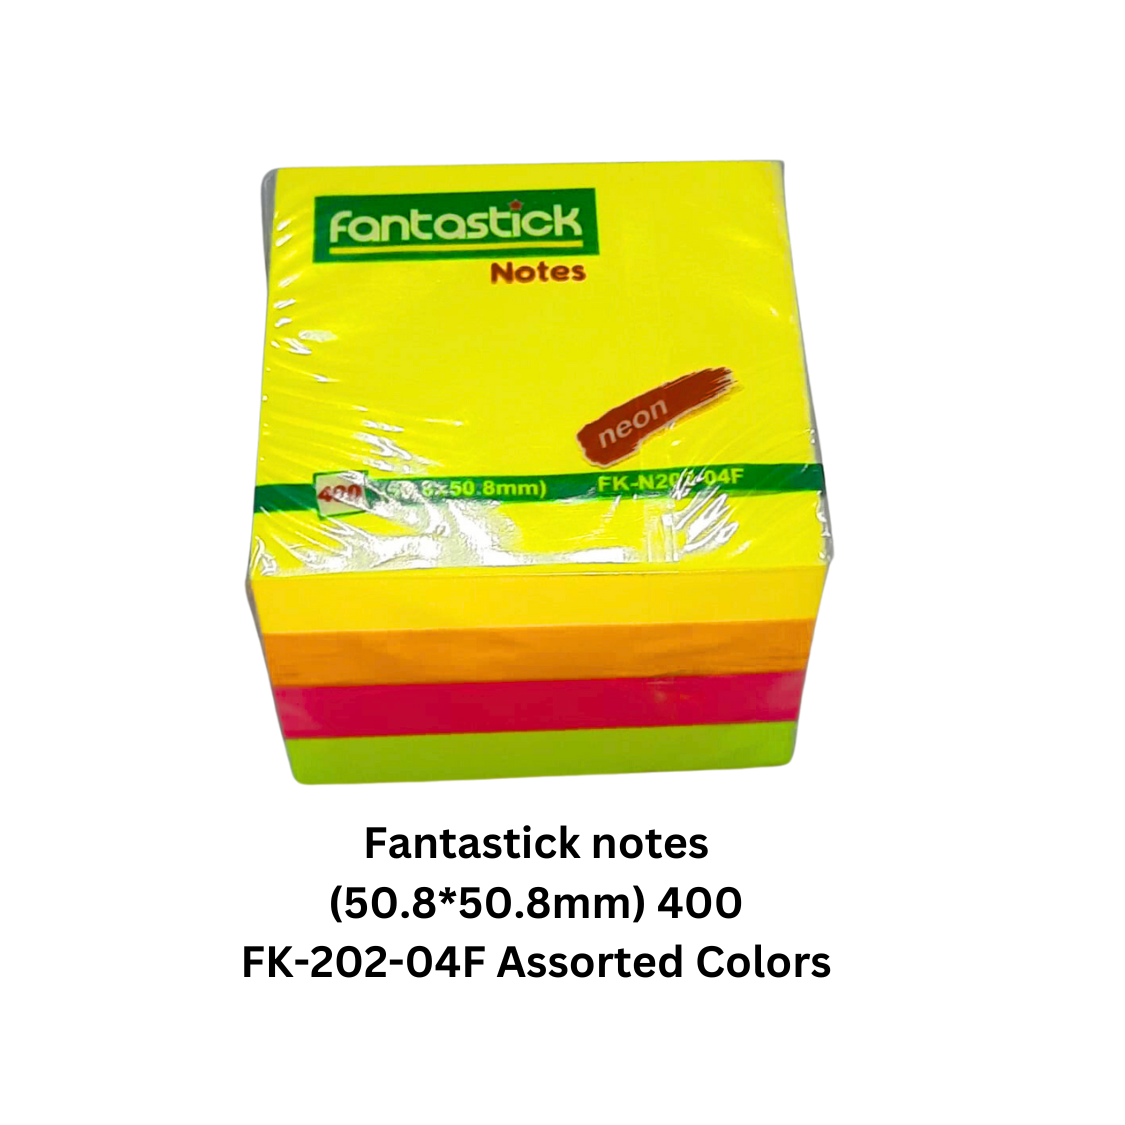 Fantastick notes 50.8*50.8mm 400 FK-202-04F Assorted Colors in qatar